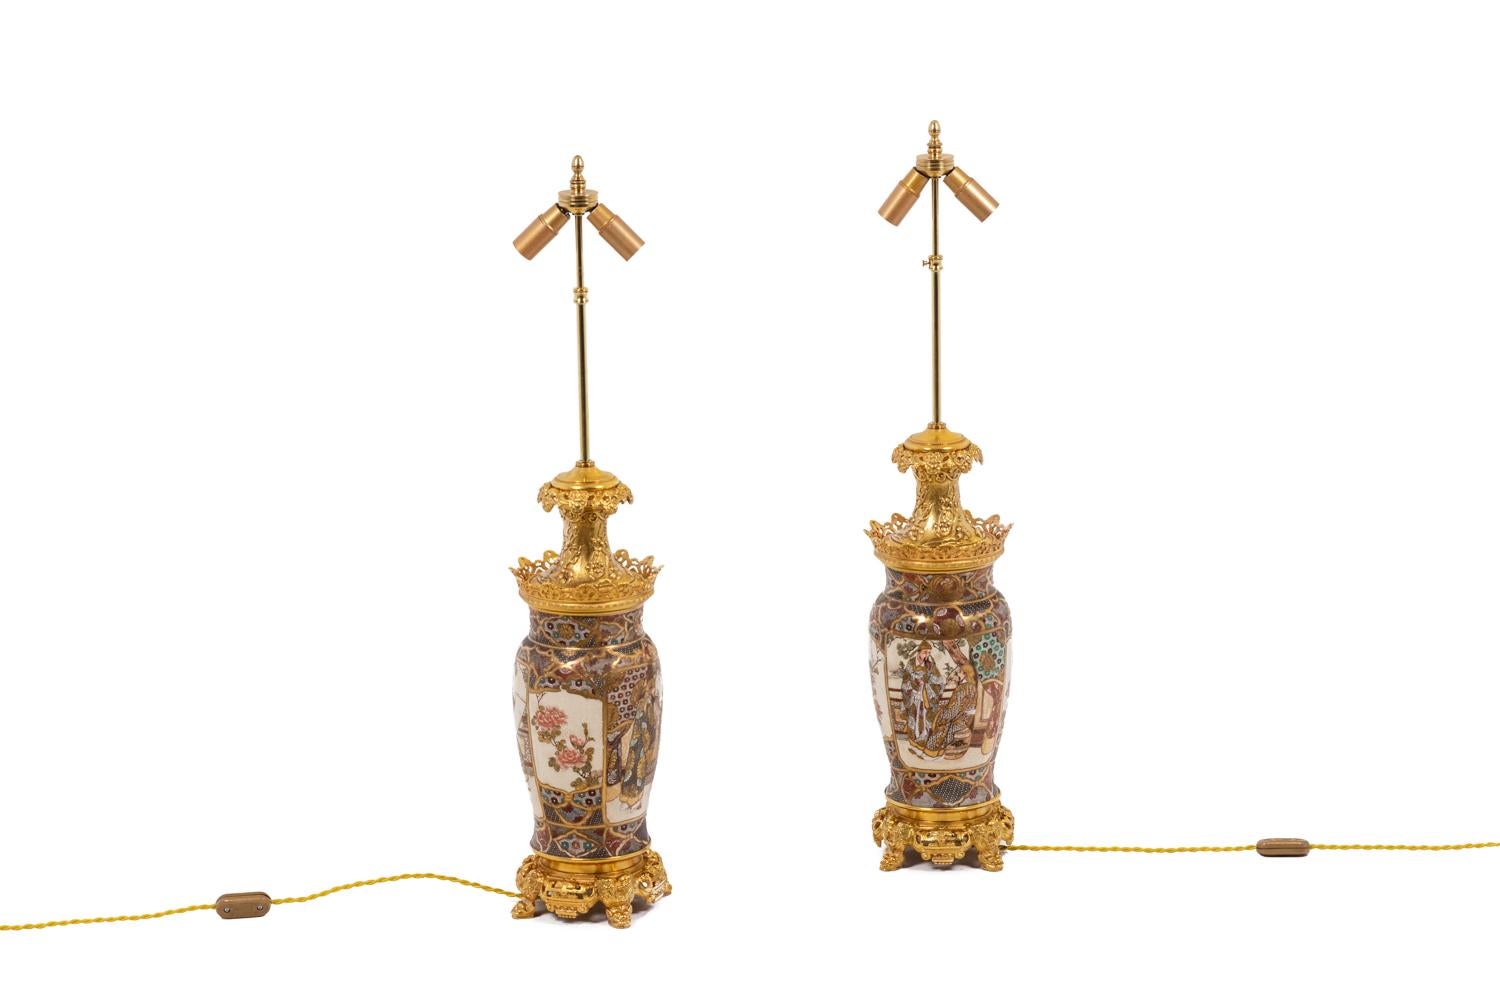 Pair of egg-shaped lamps in a fine Satsuma earthenware. Body presenting Japanese dignitaries speaking together inside cartouches on a white background as well as red, golden, brown and green decorative and geometric motifs. Mount in gilt bronze